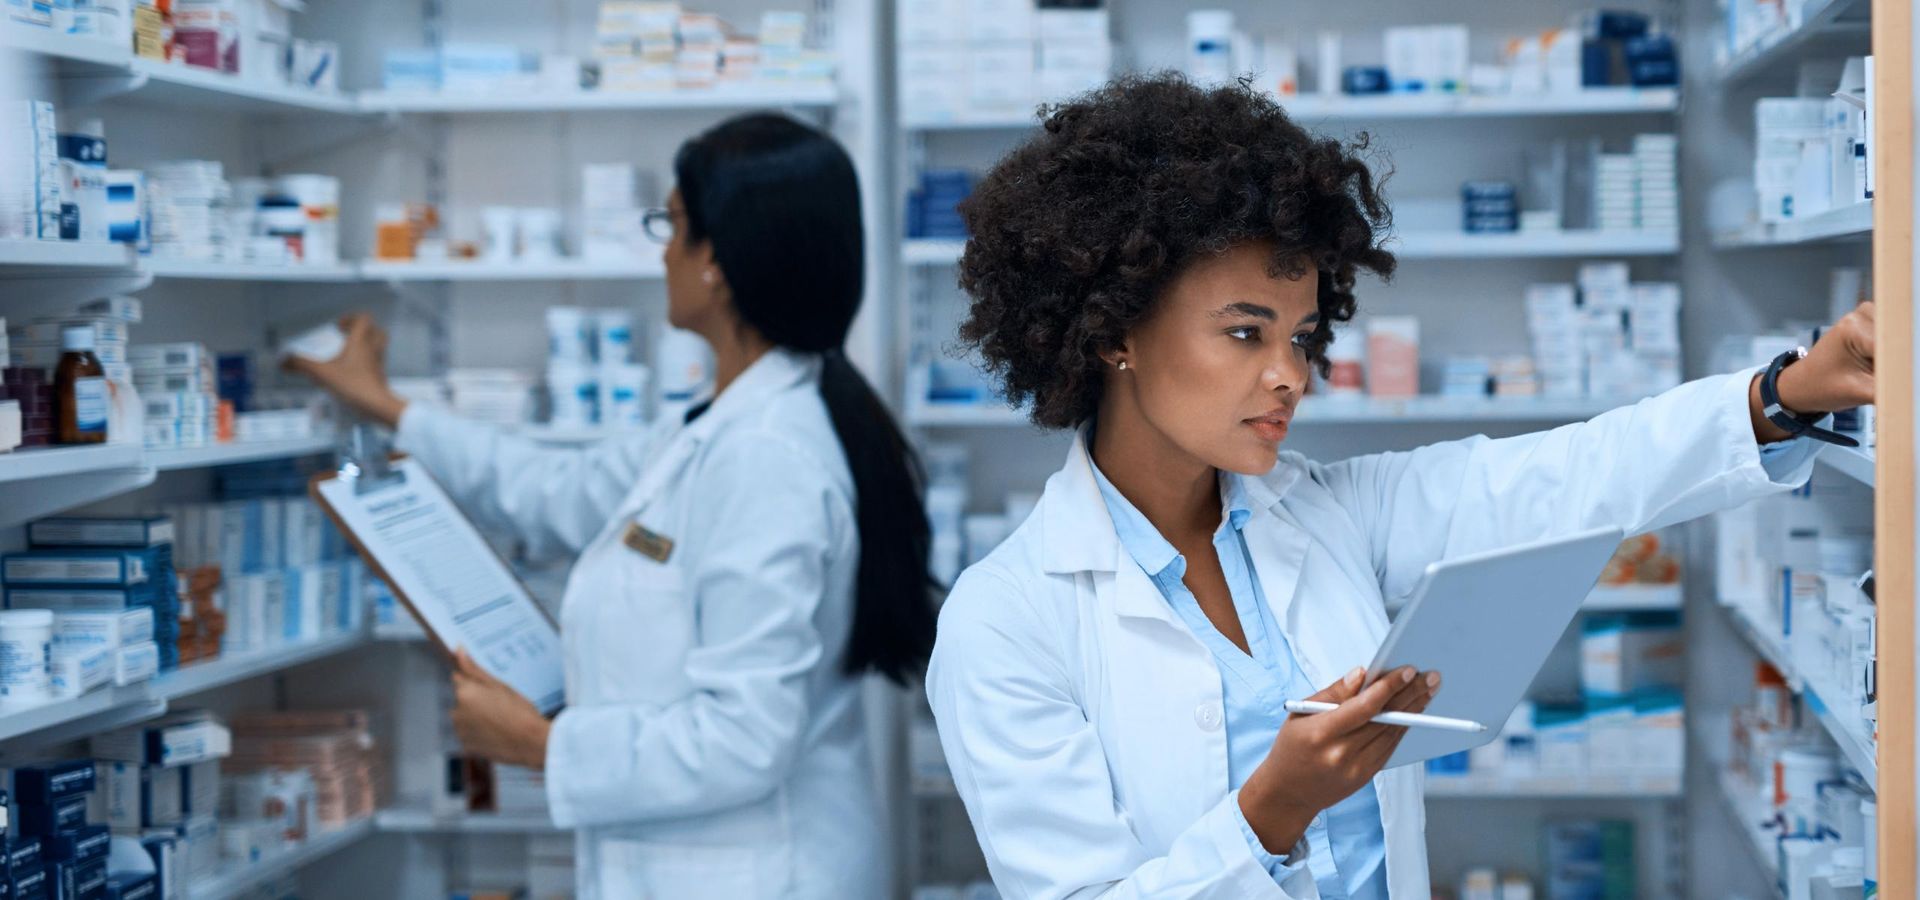 Pharmacy management software: key features and implementation best practices